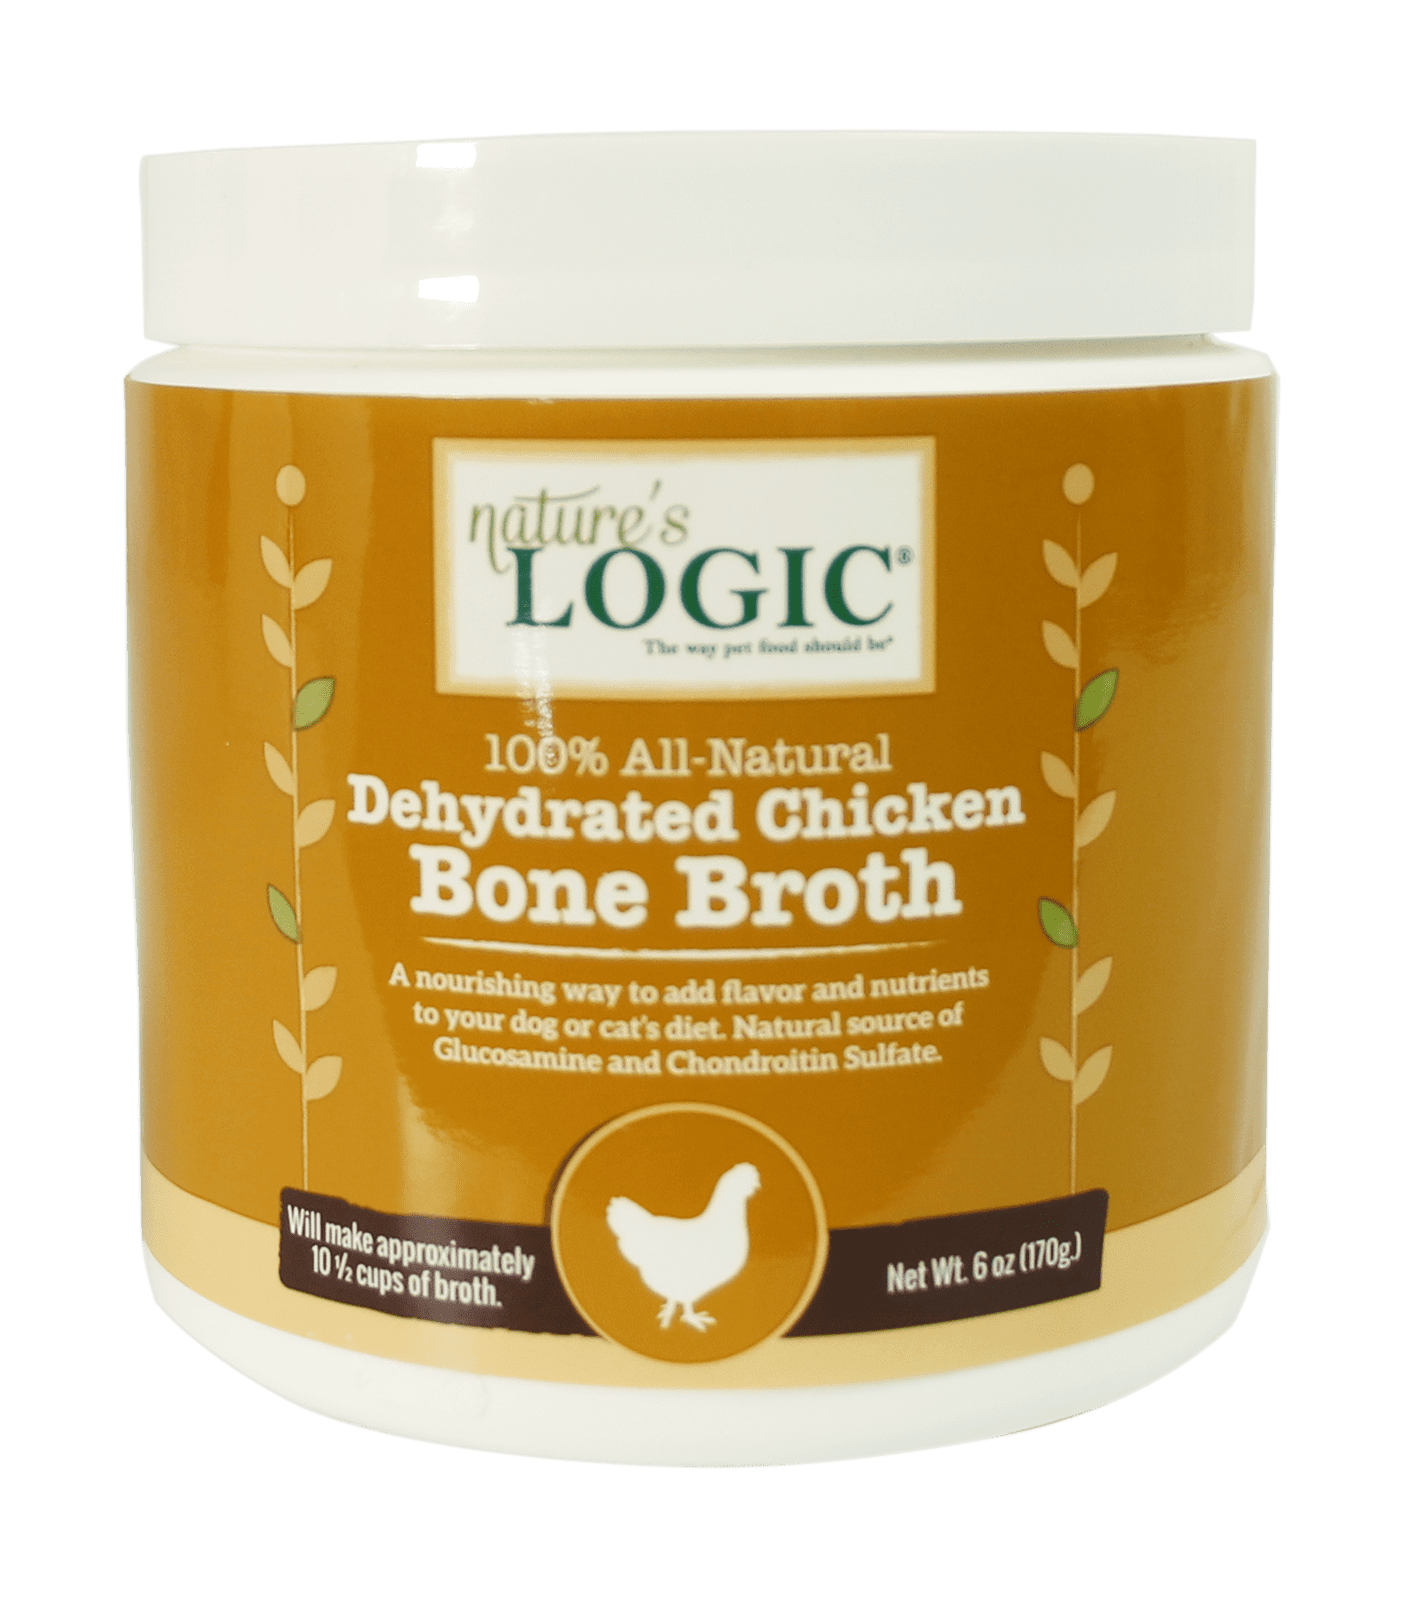 Nature's Logic 100% all natural dehydrated chicken bone broth for pets.